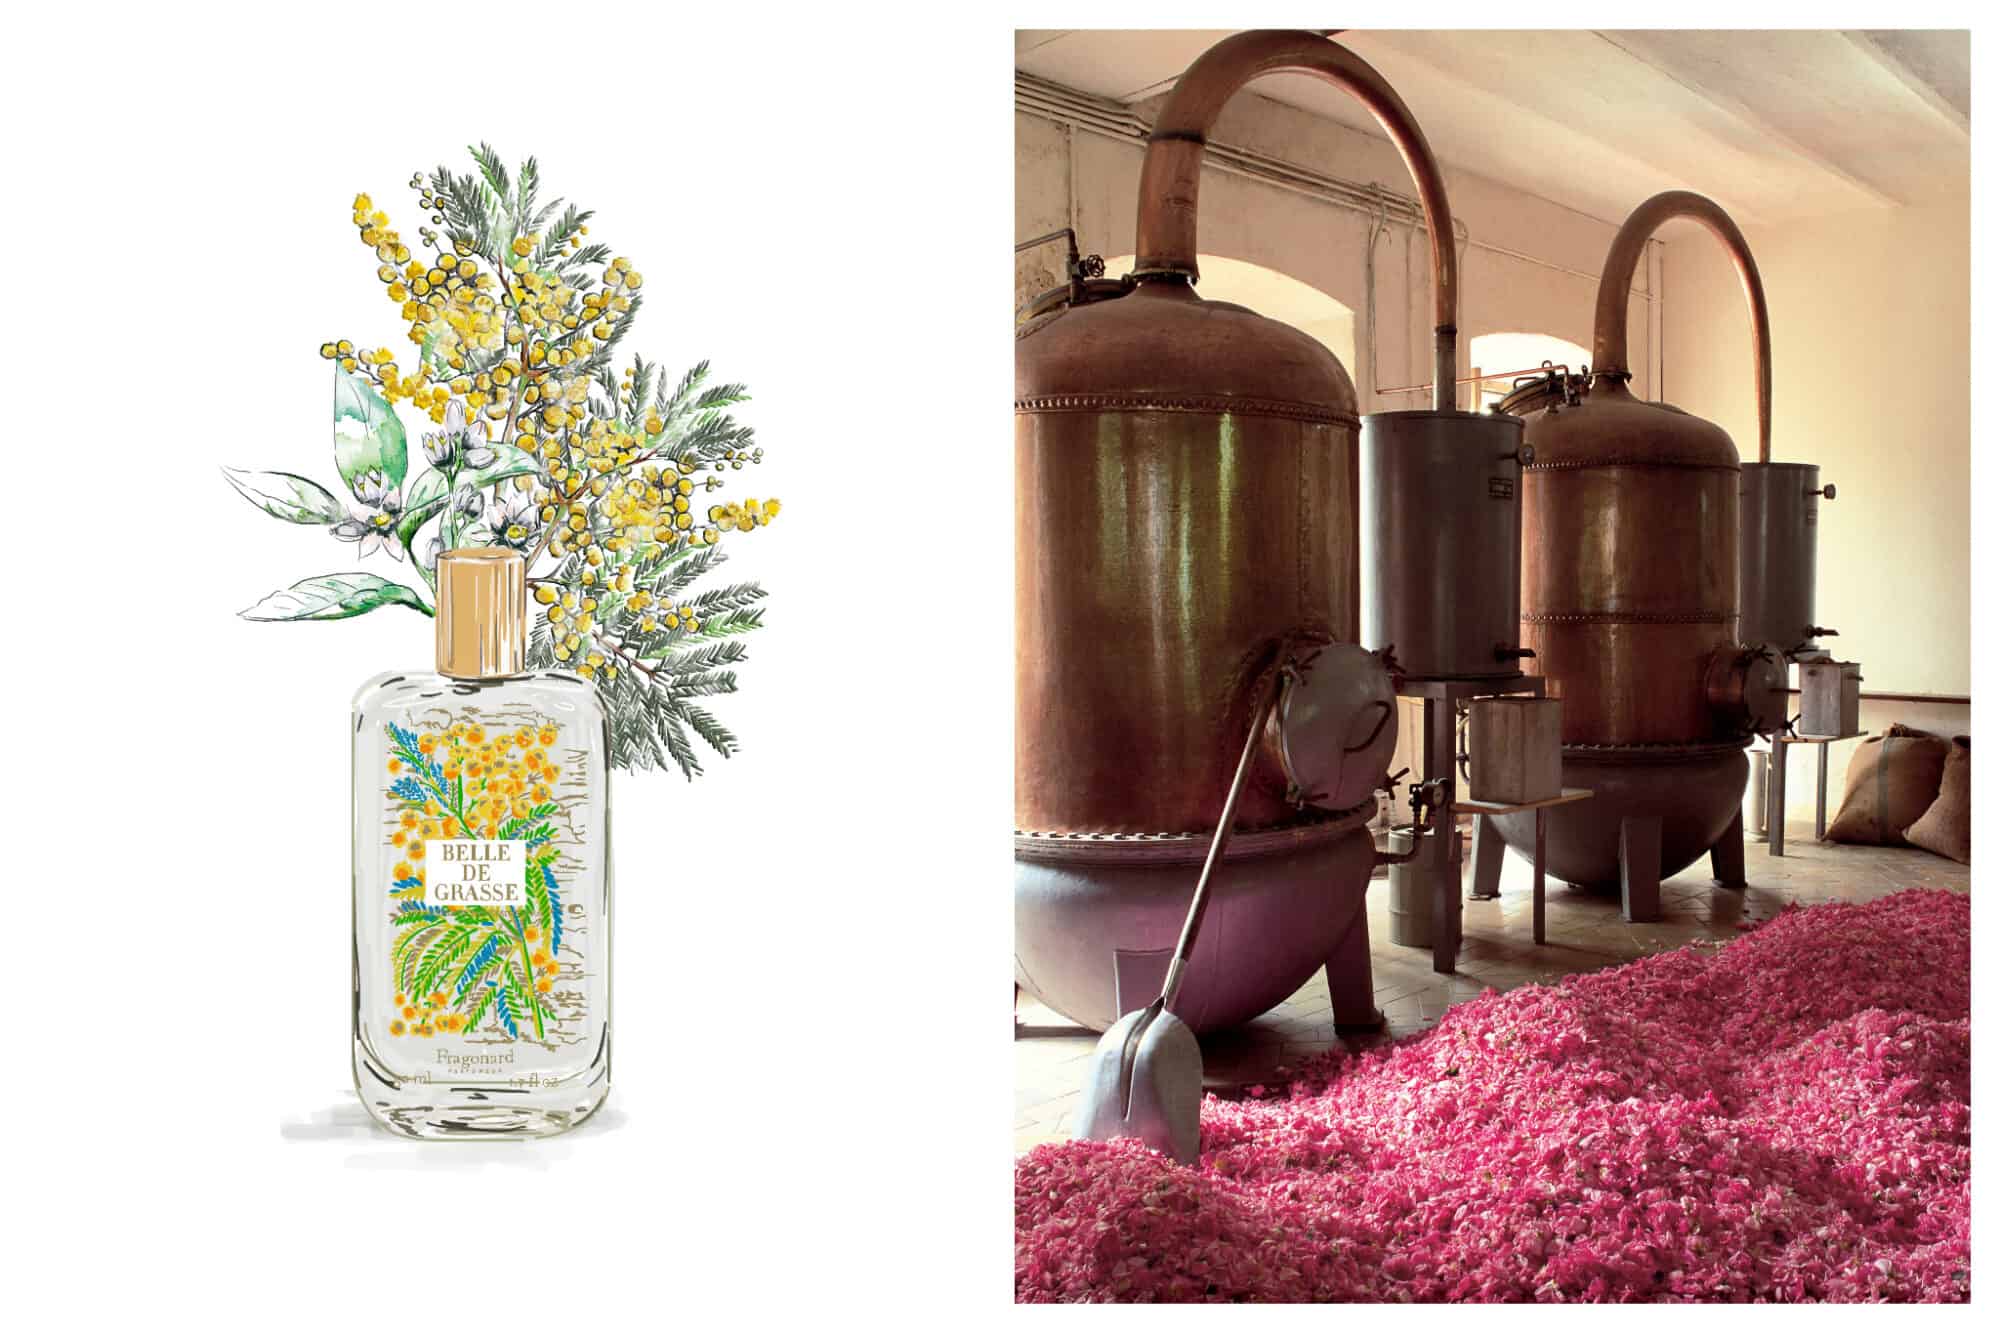 Left: Artwork of green and yellow lowers and a bottle of Fragonard's Belle de Grasse perfume, Right: Copper stills sit next to each other, ready to distill the large pile of pink rose petals in front of them